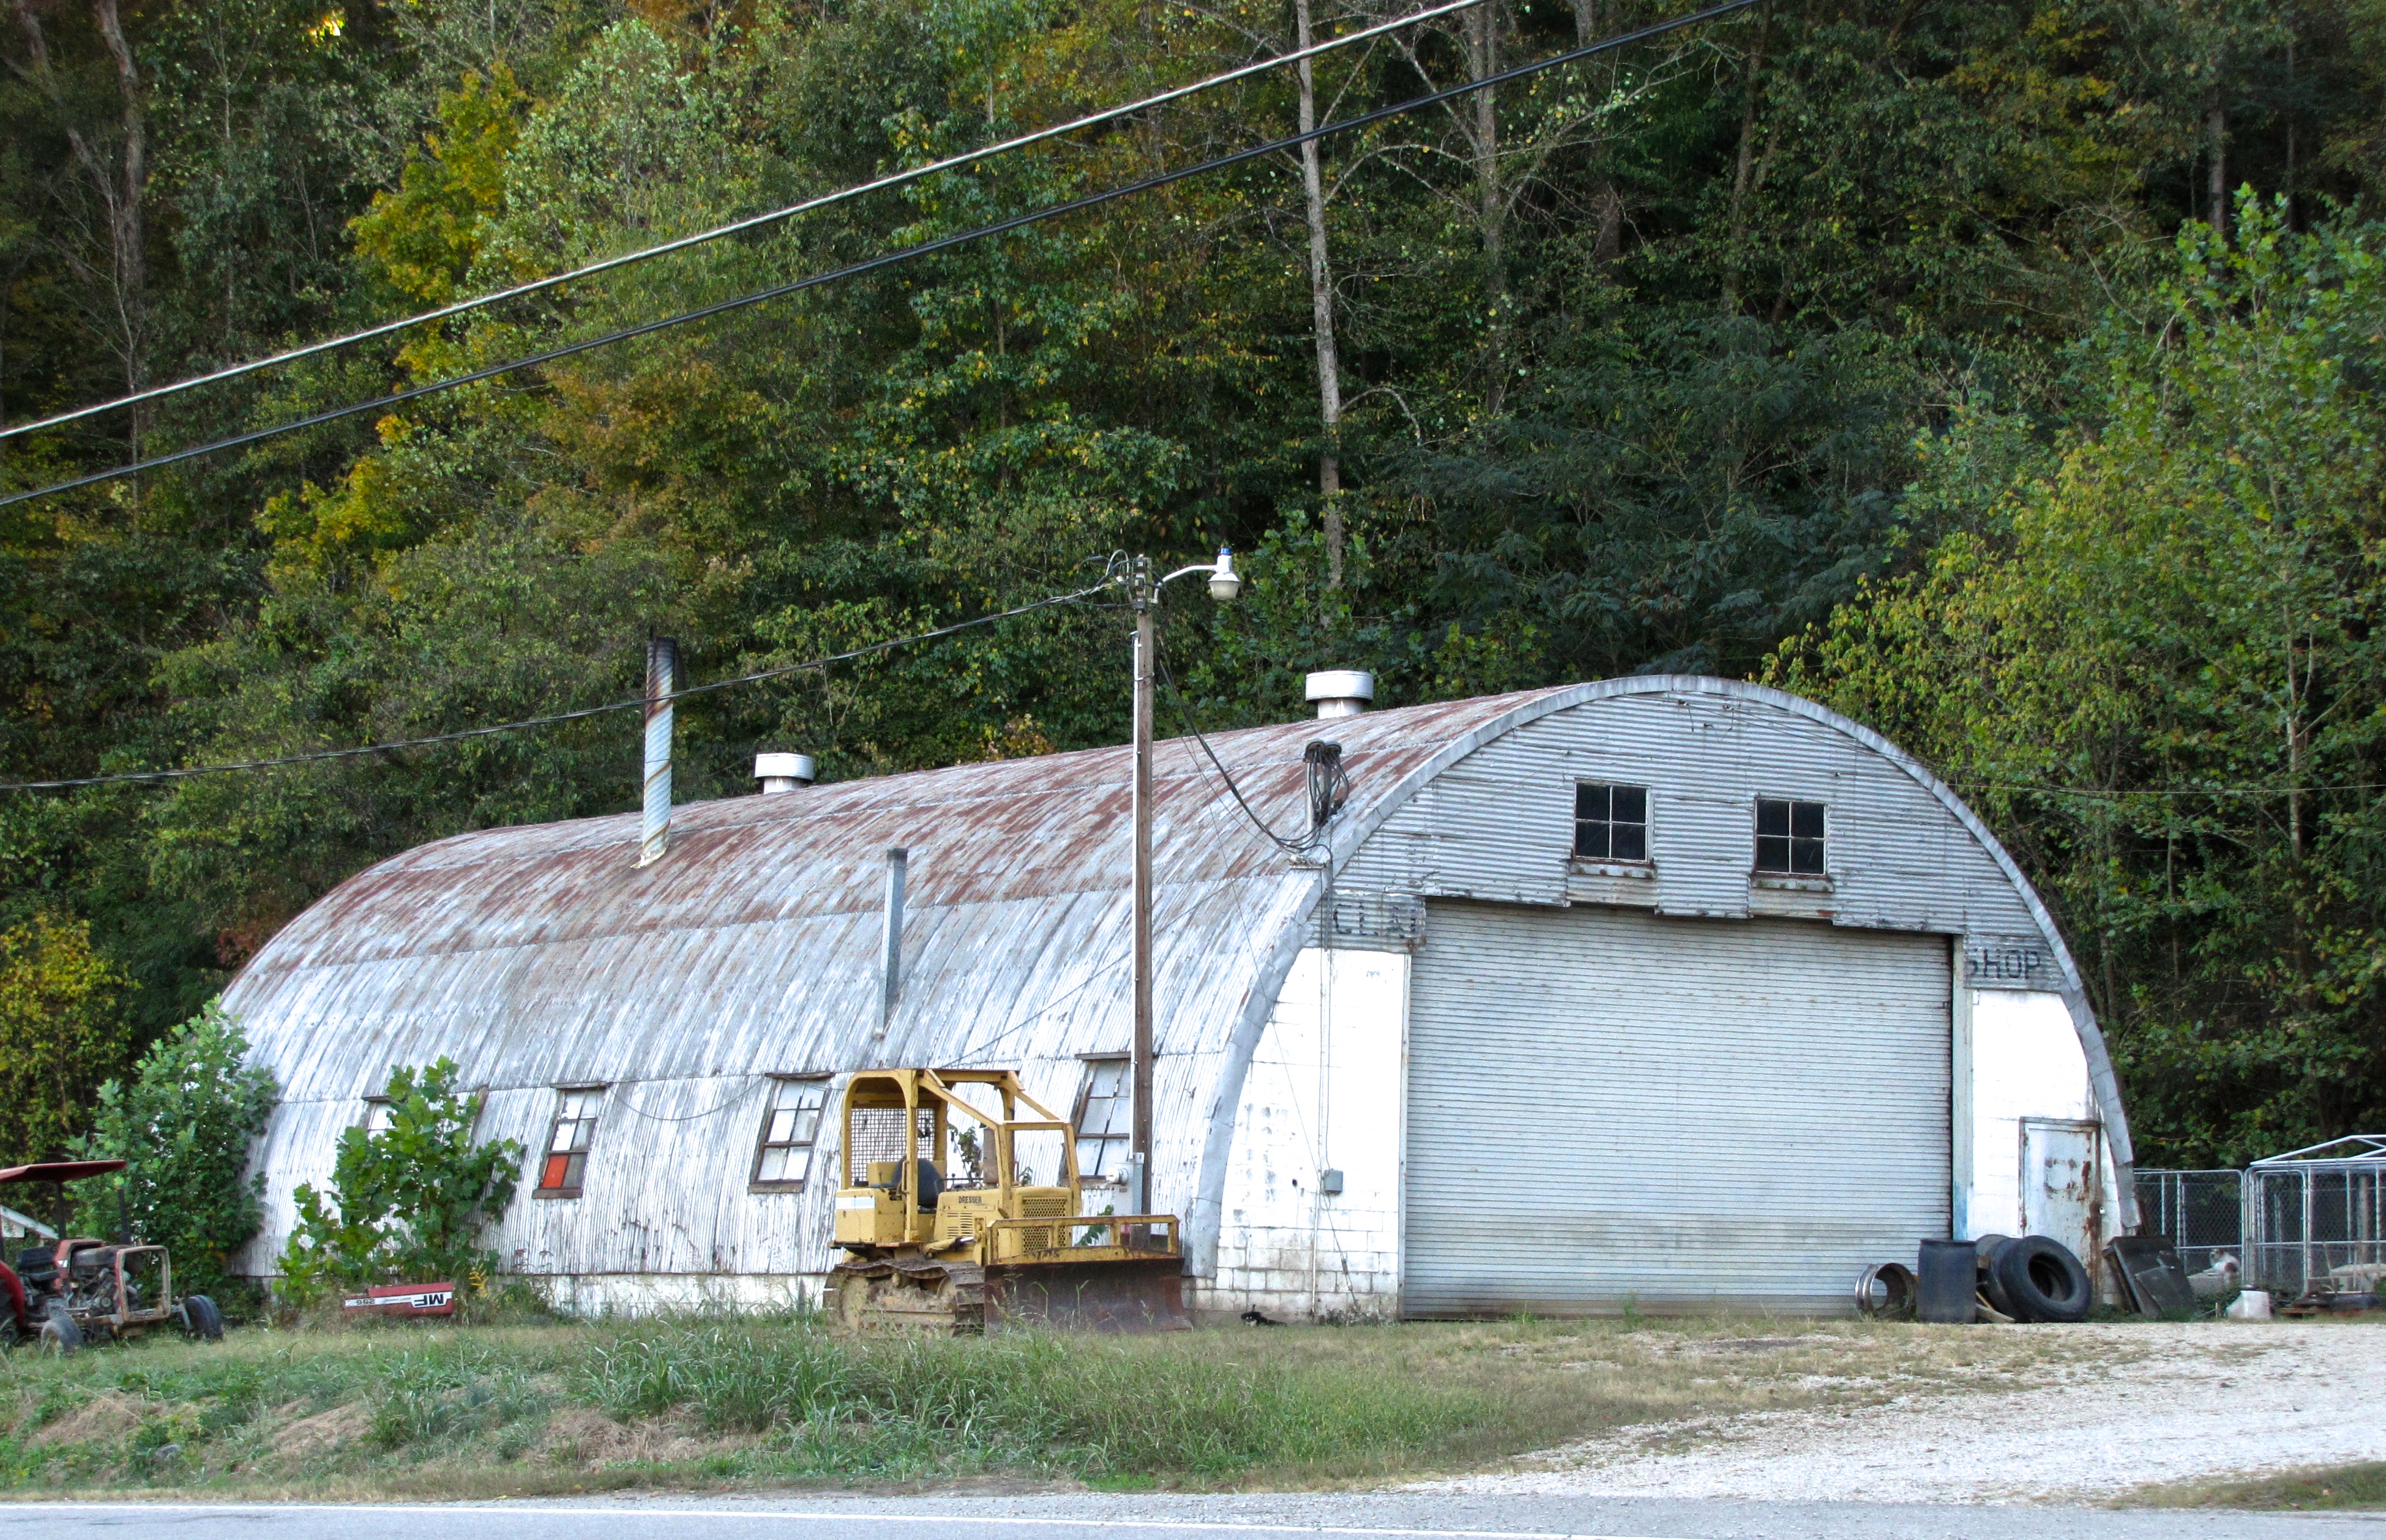 quonset hut in Copyright Notice, NY